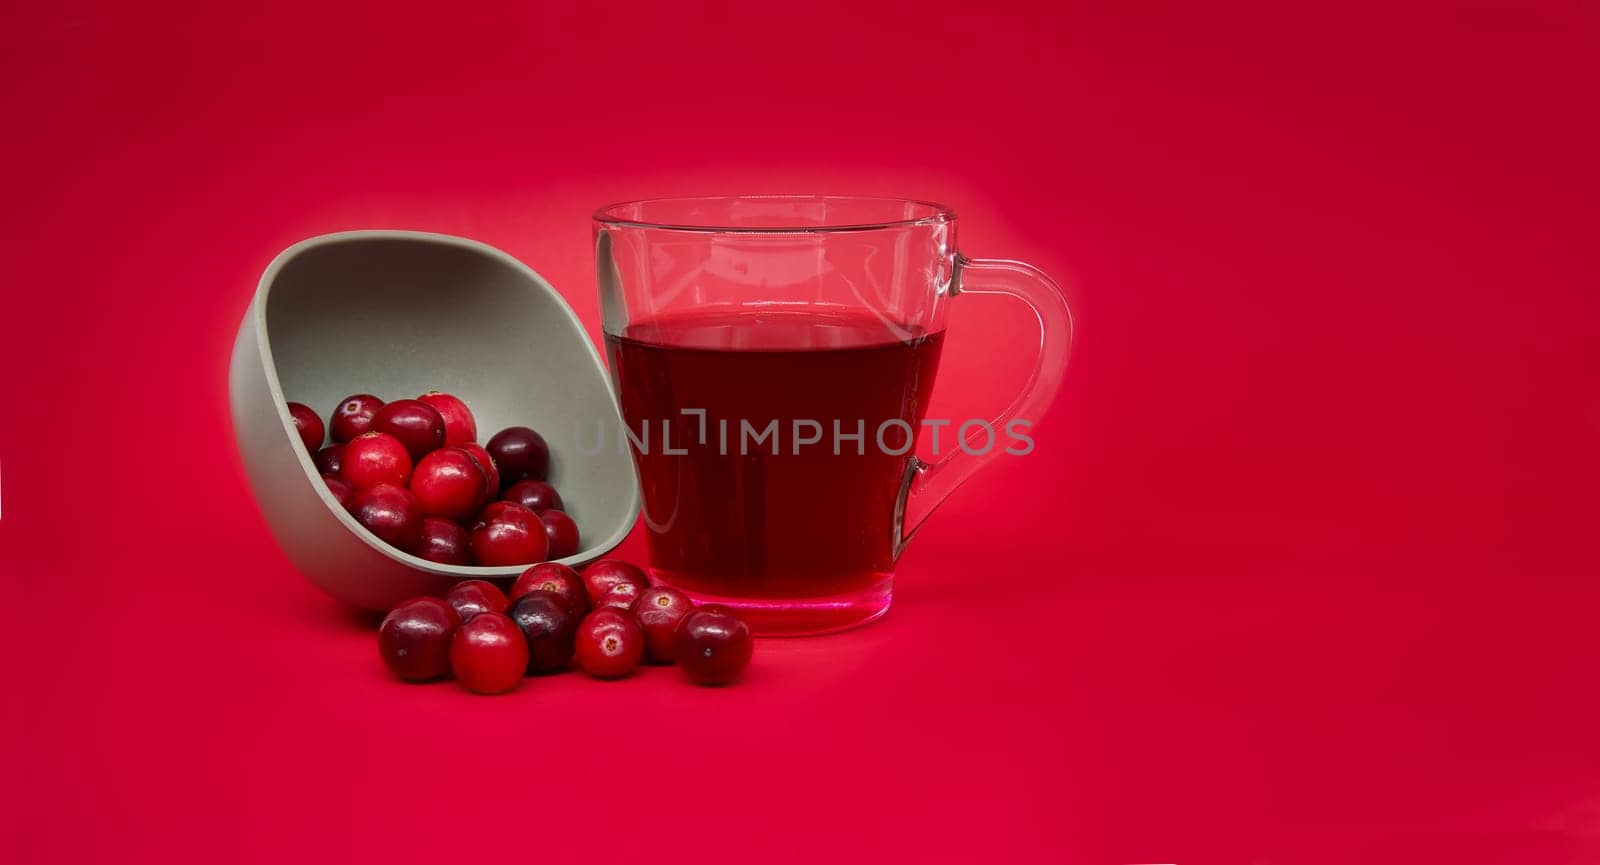 Grey ceramic bowl full of red cranberries and transparent cup containing a dark red cranberry juice against a vibrant red background